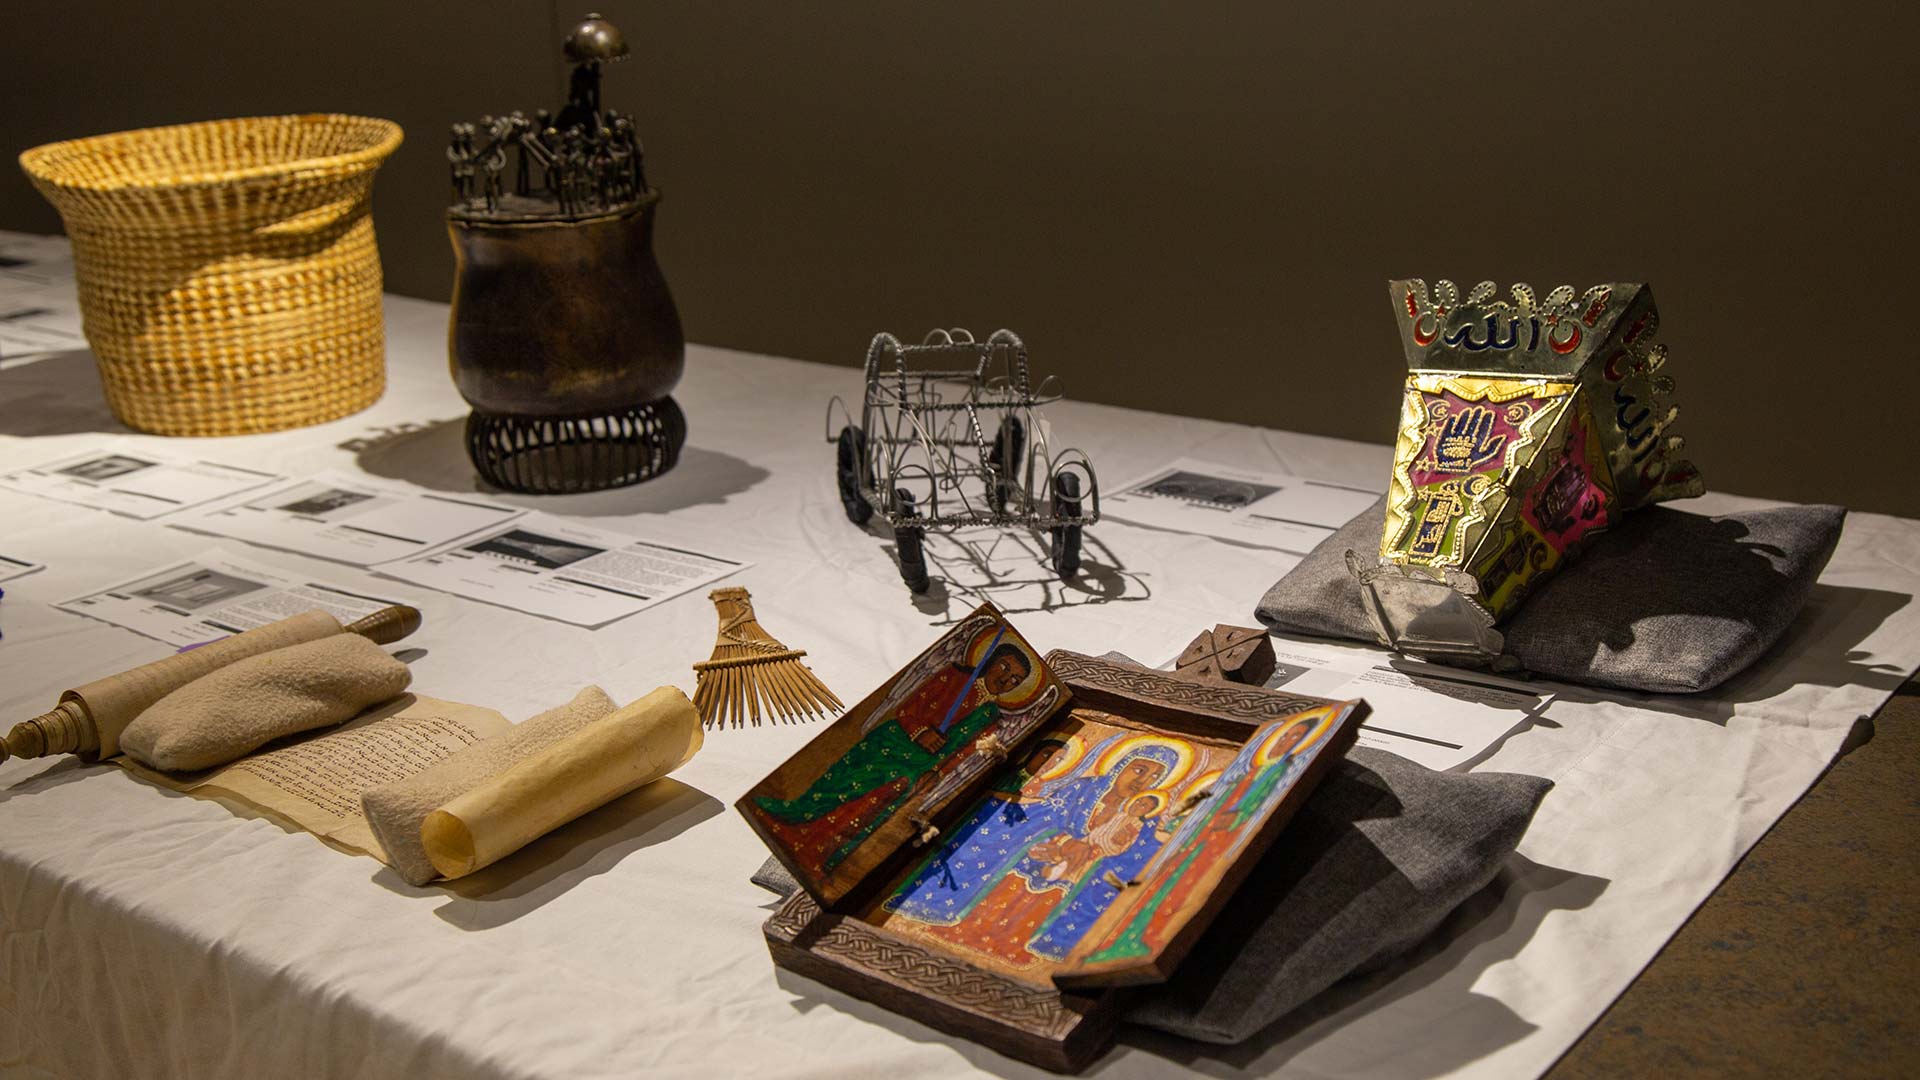 A table of objects from africa with printed documenation